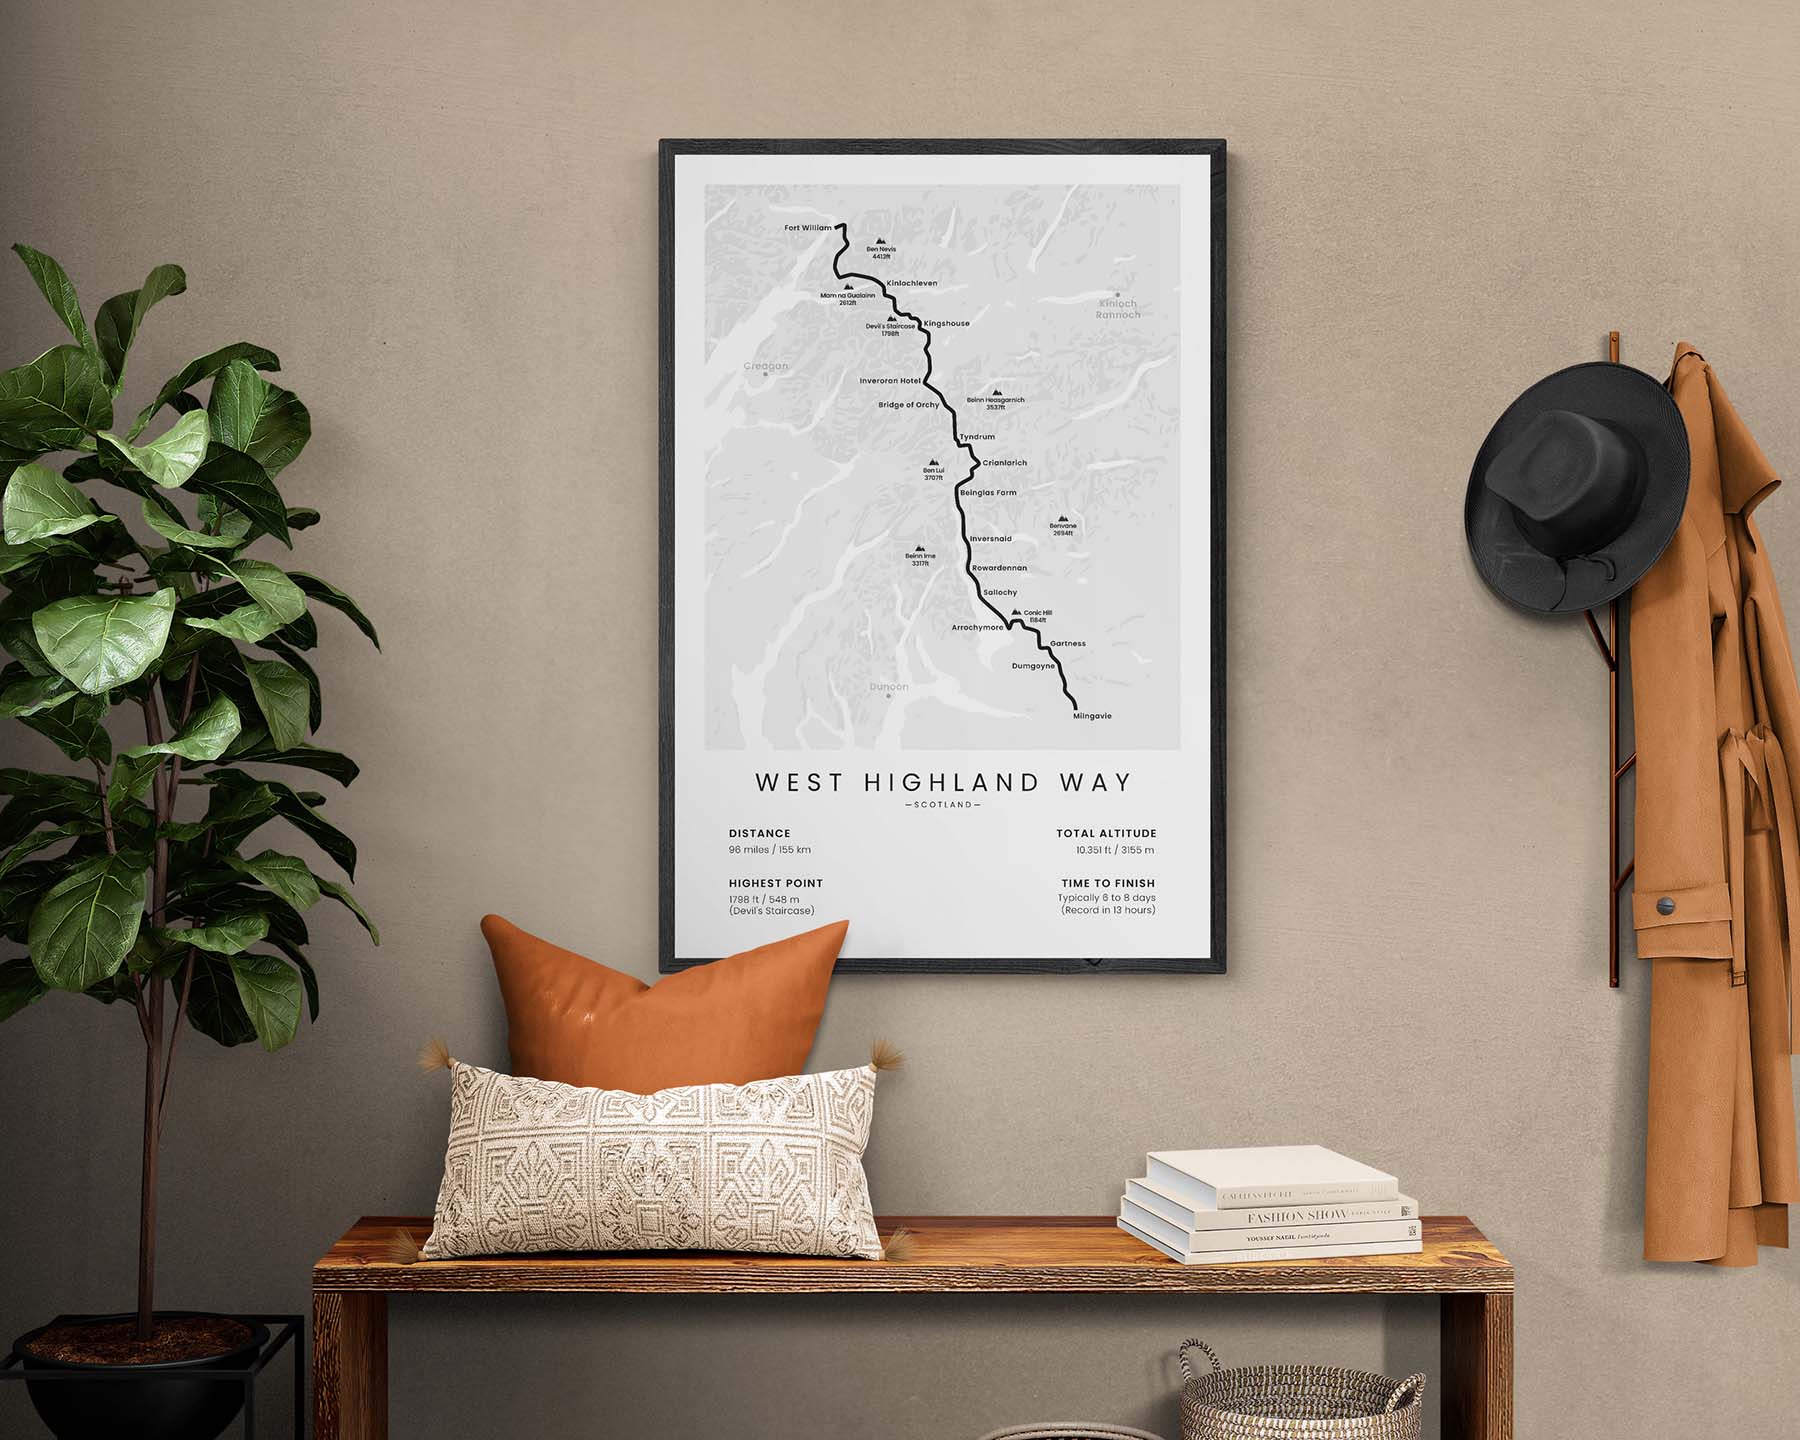 West Highland Way hiking trail map with white background in hallway interior